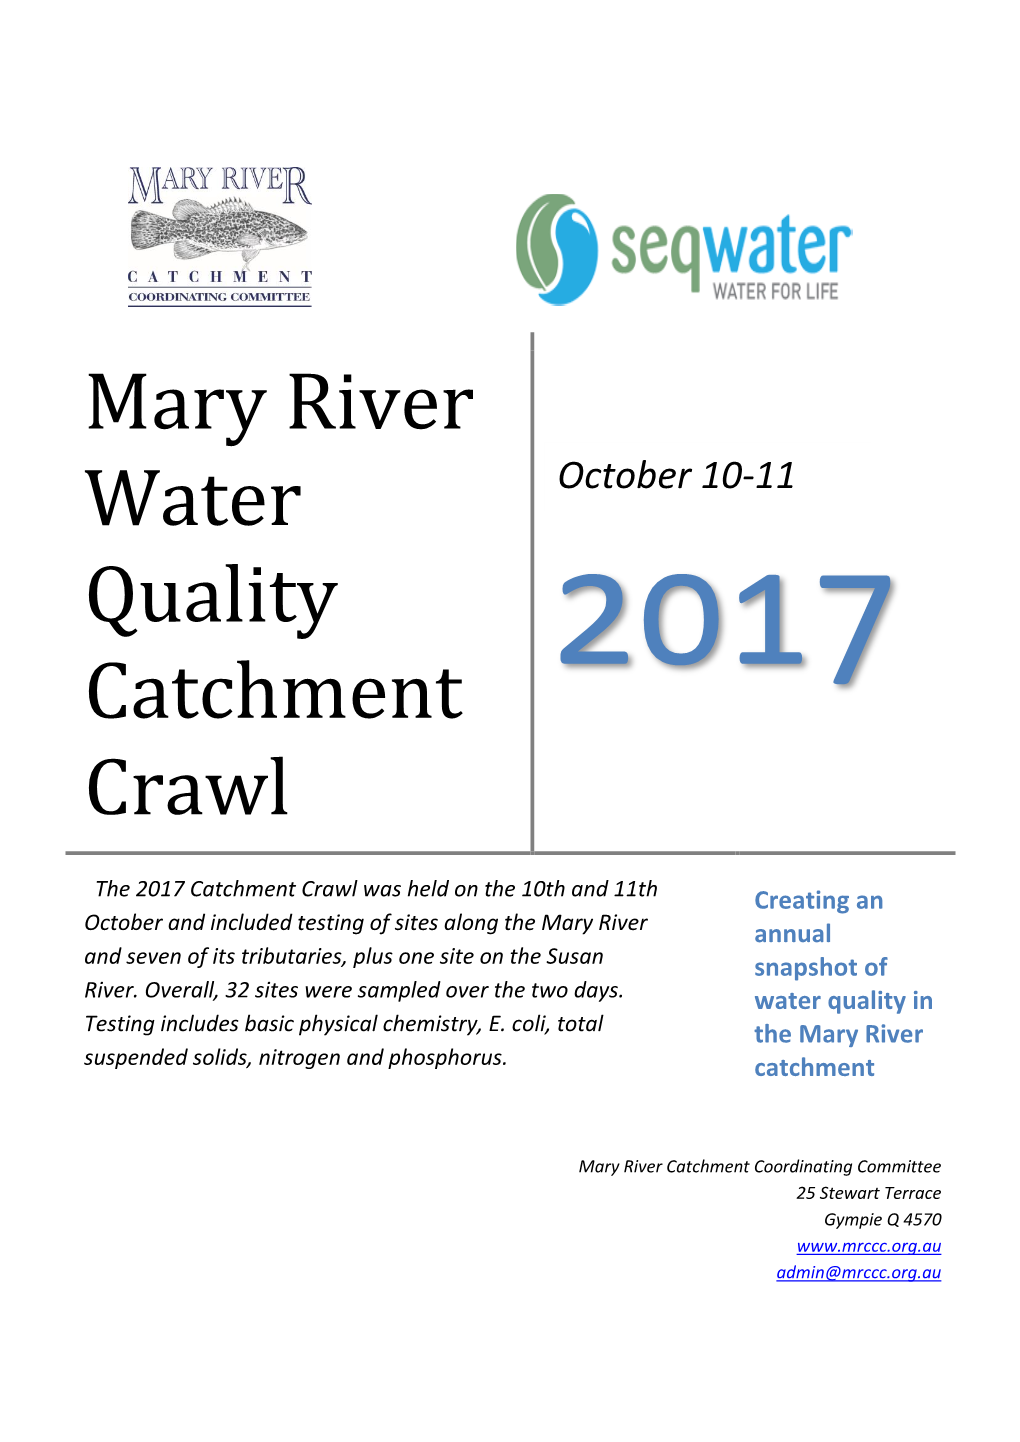 Mary River Water Quality Catchment Crawl Takes Place Annually in the Month of October, and Is Organised by the Mary River Catchment Coordinating Committee (MRCCC)